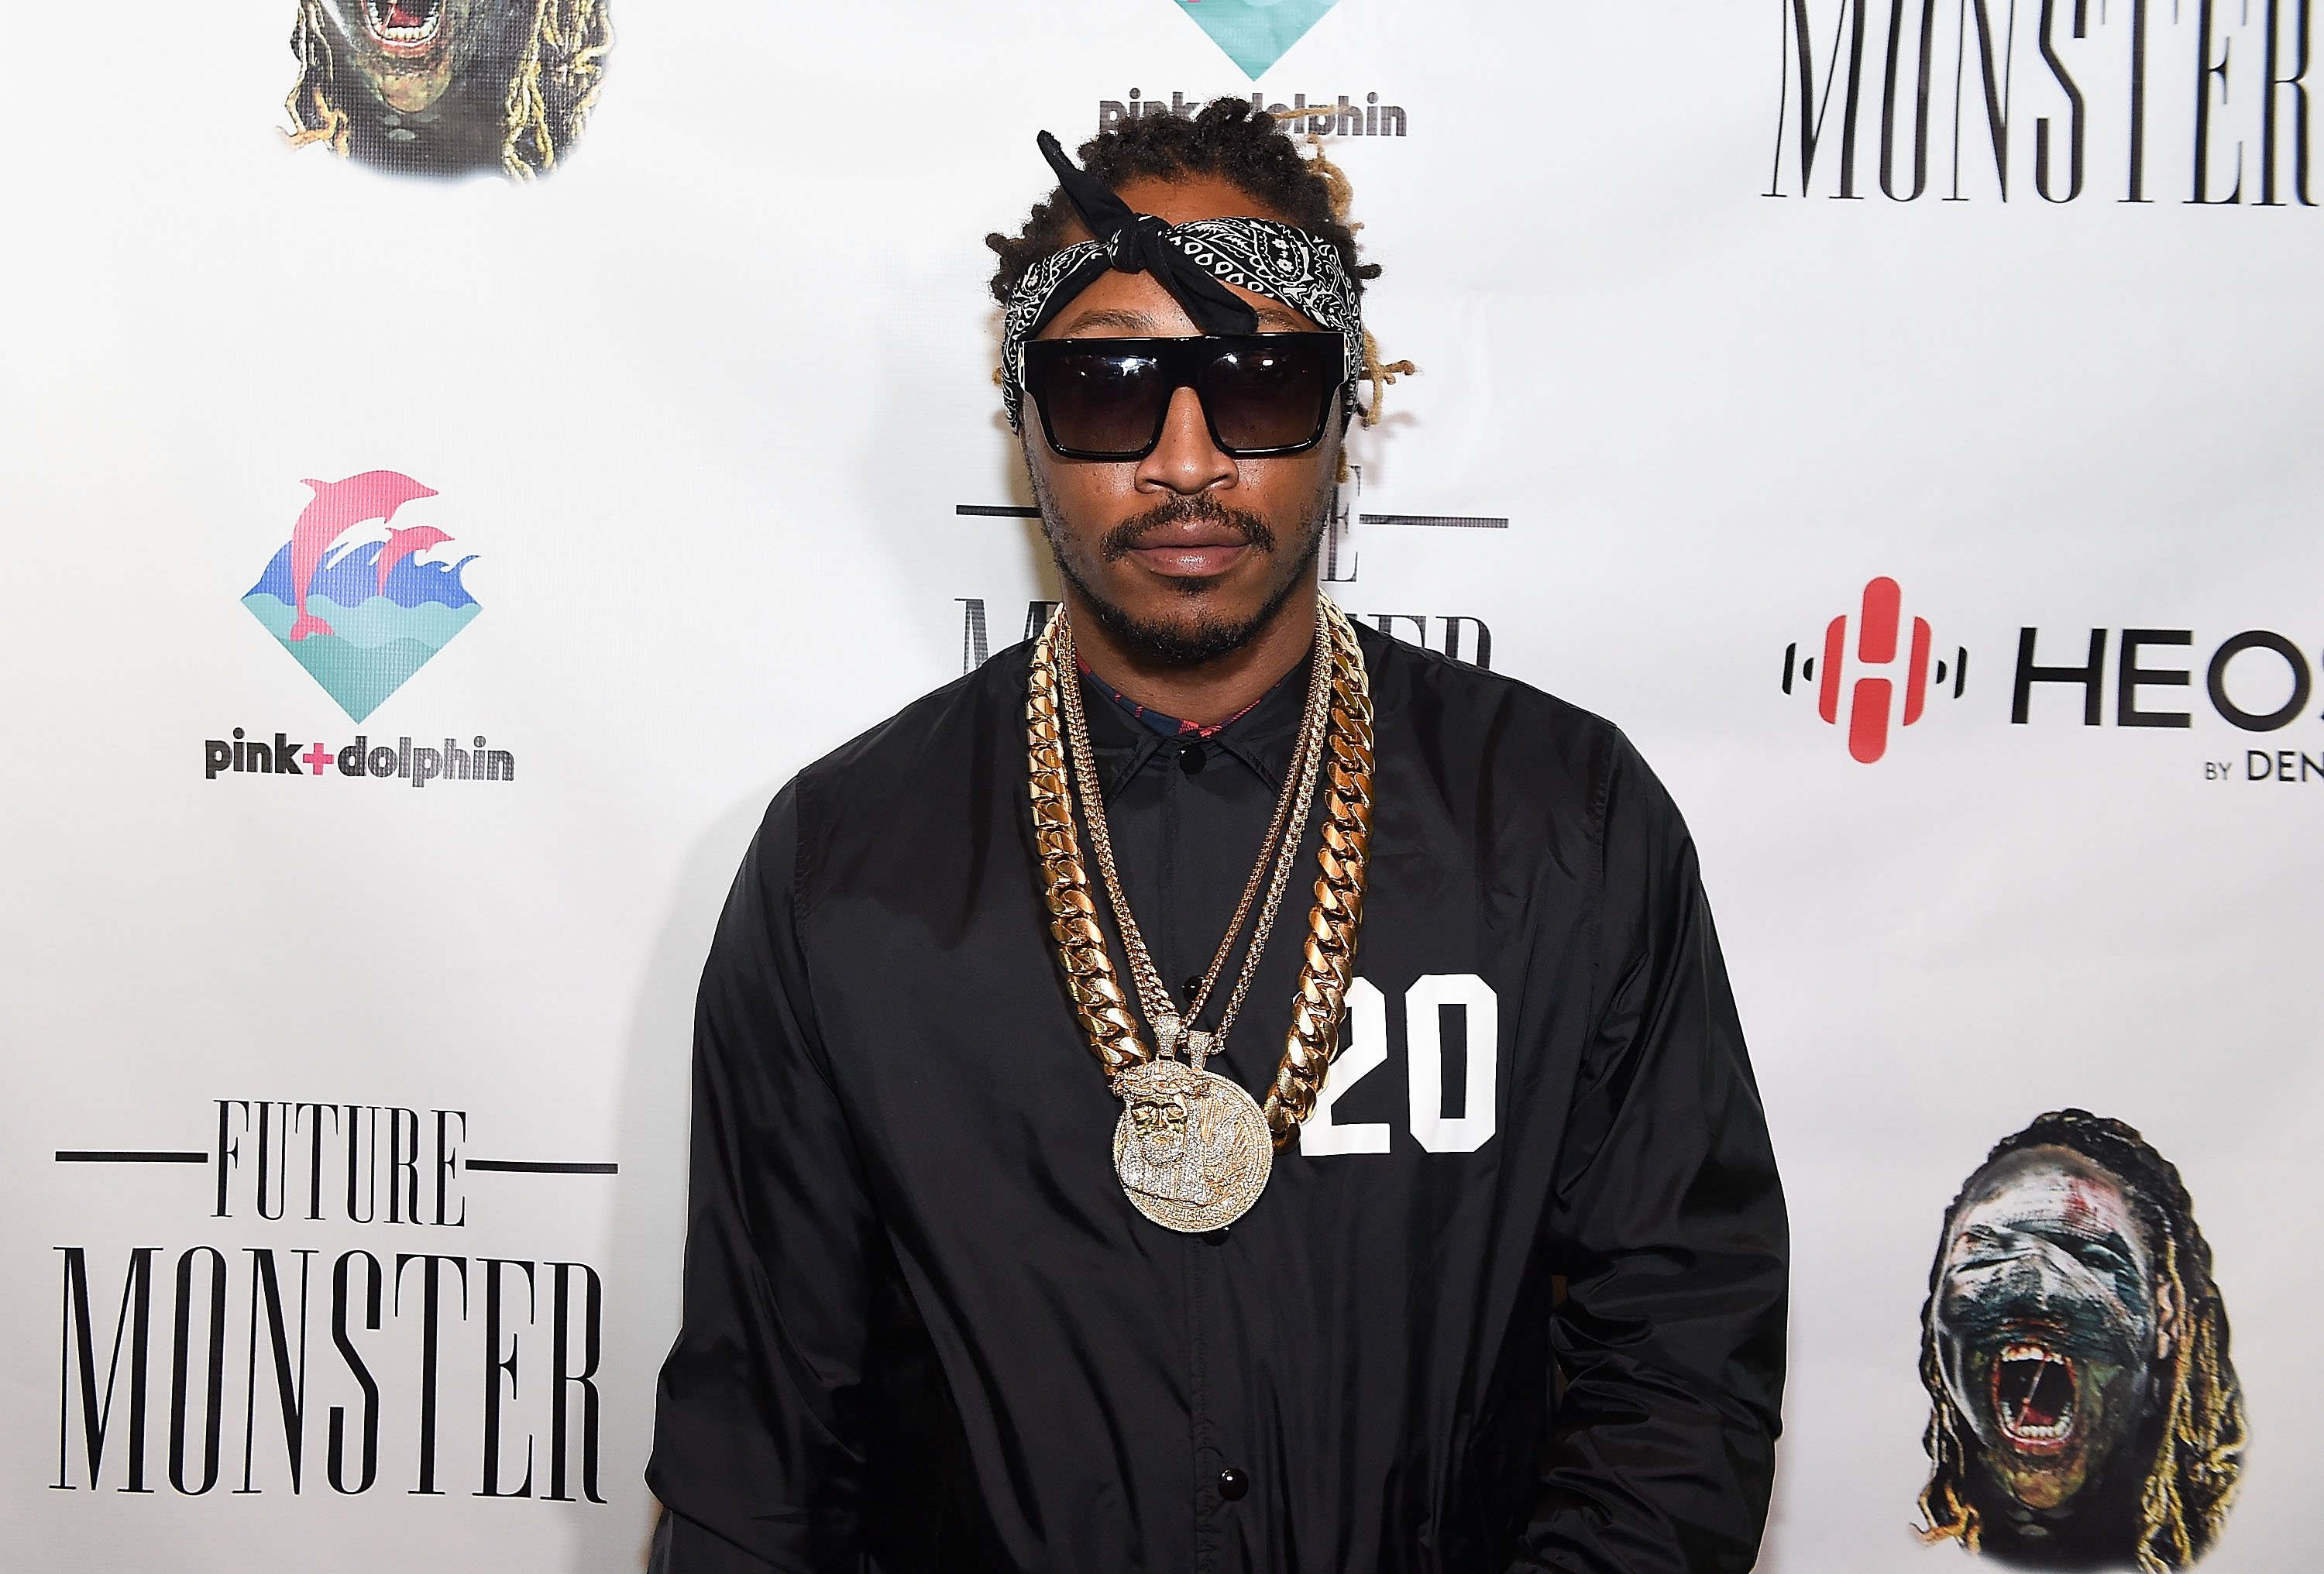 Rapper Future at the Future Monster Halloween Costume Party in Georgia in October 2014. | Photo: Getty Images